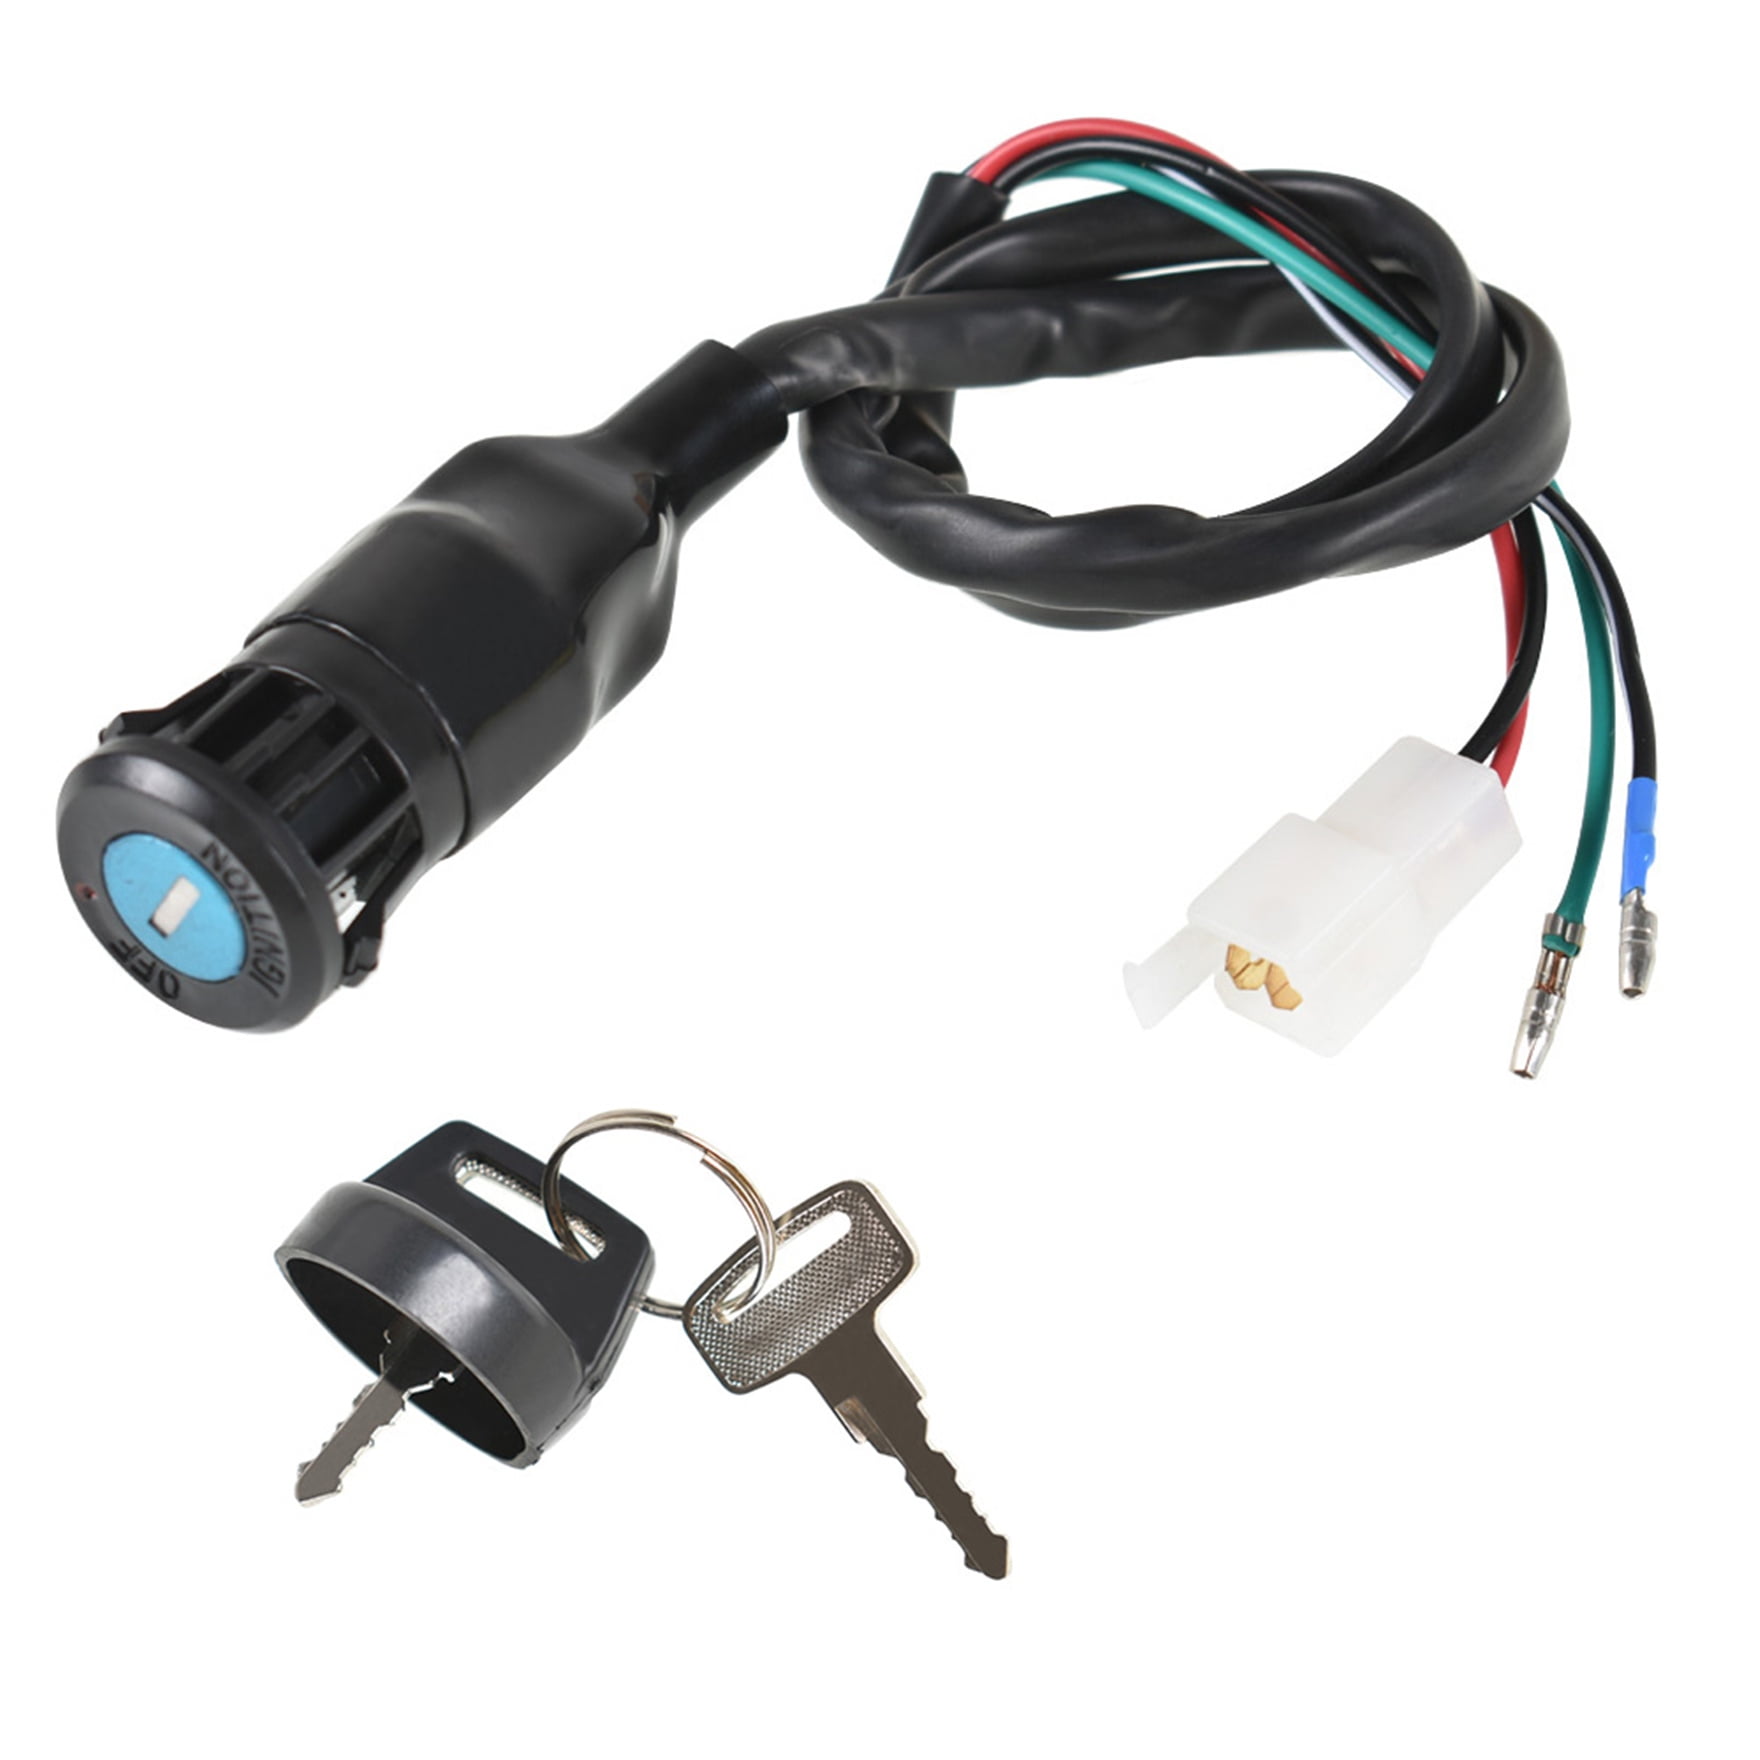 Key Ignition Switch for Apollo Dirt Bike & ATV with Water